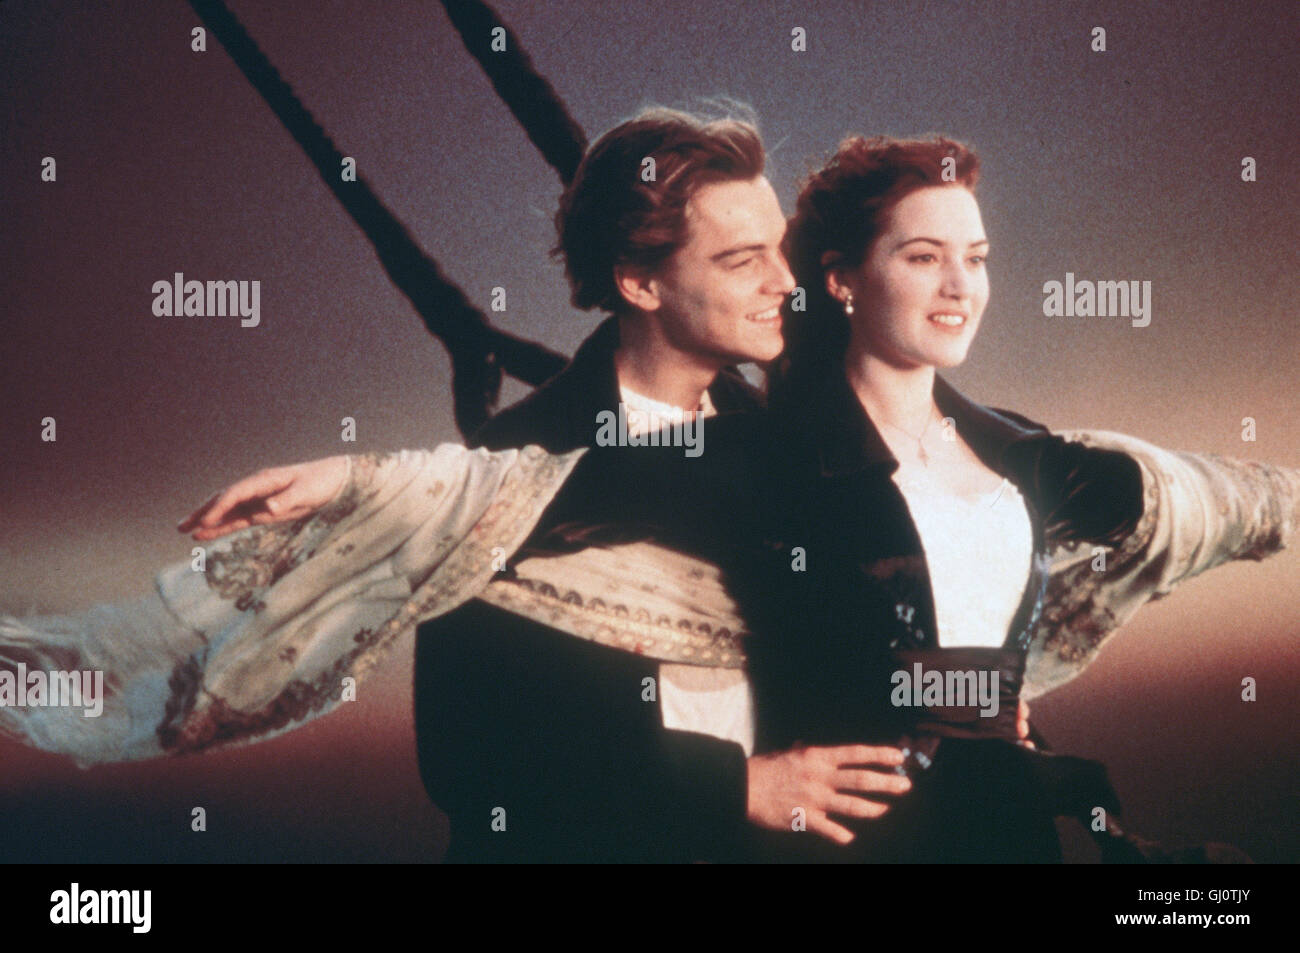 Rose having two different hairstyles in the poster has always bothered me  so may it now bother all you good people as well : r/titanic